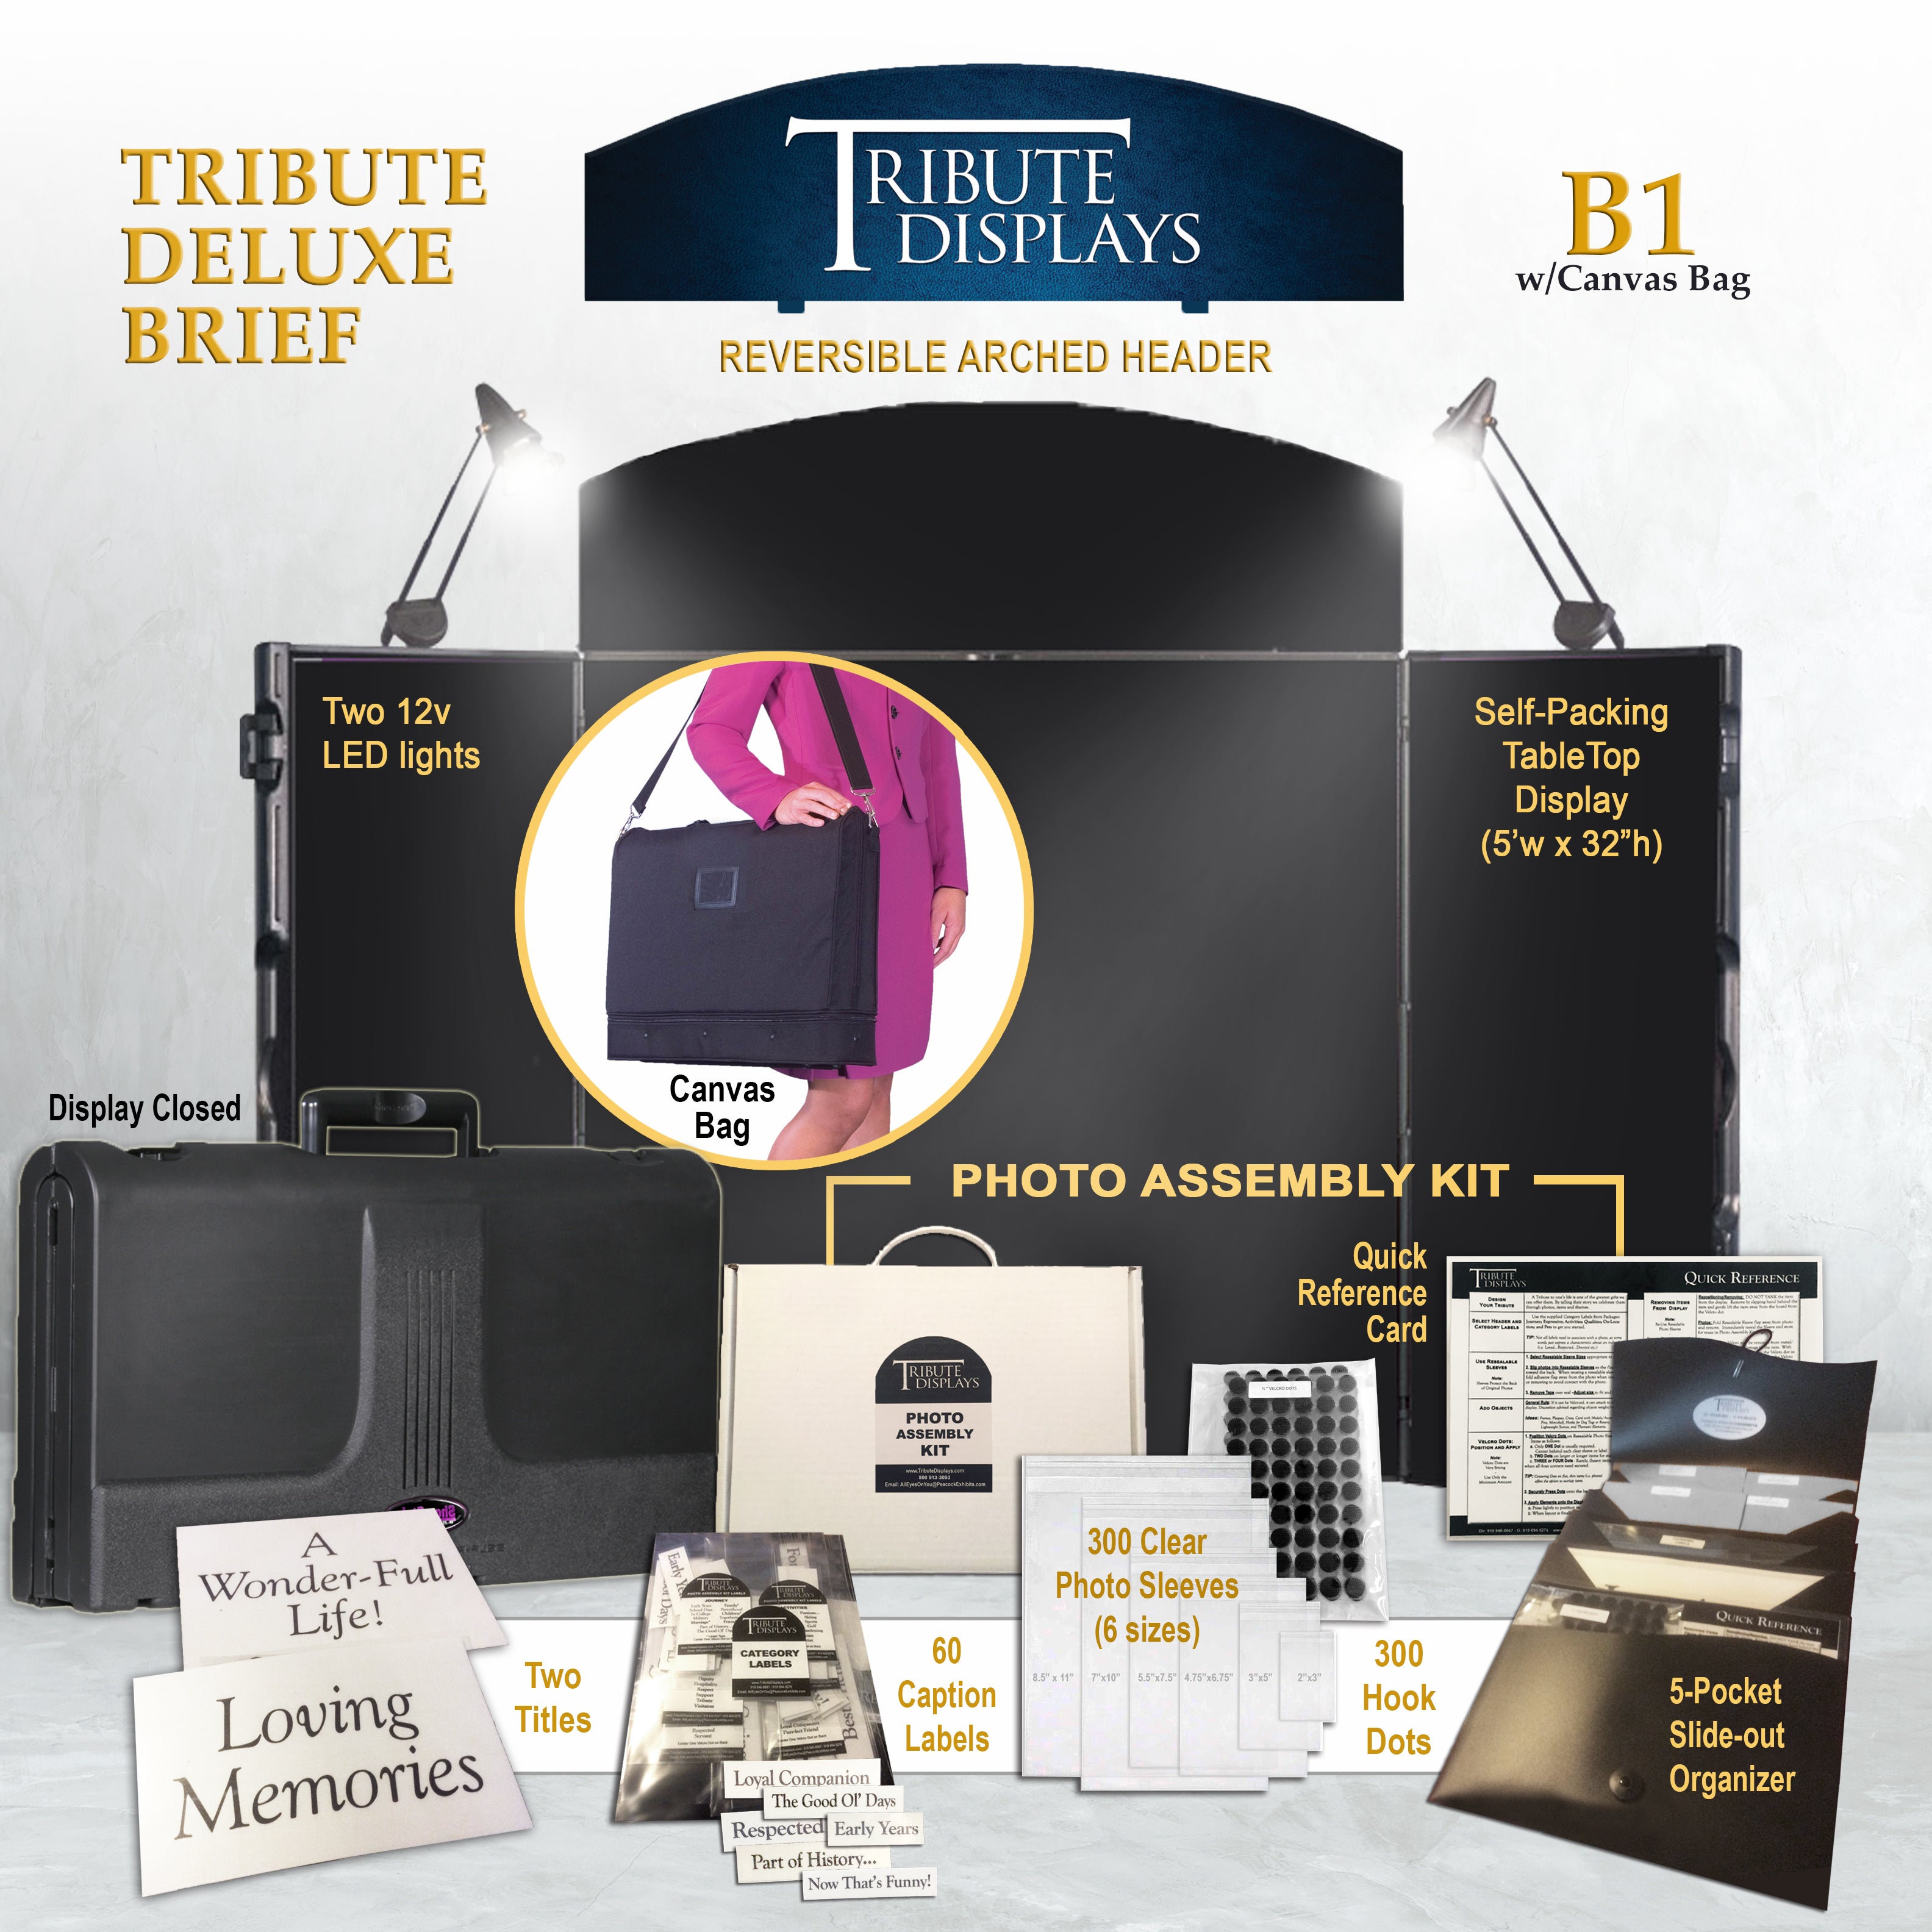 System Bundle "AAB": Tribute "Triple"- (Double Max + Deluxe)